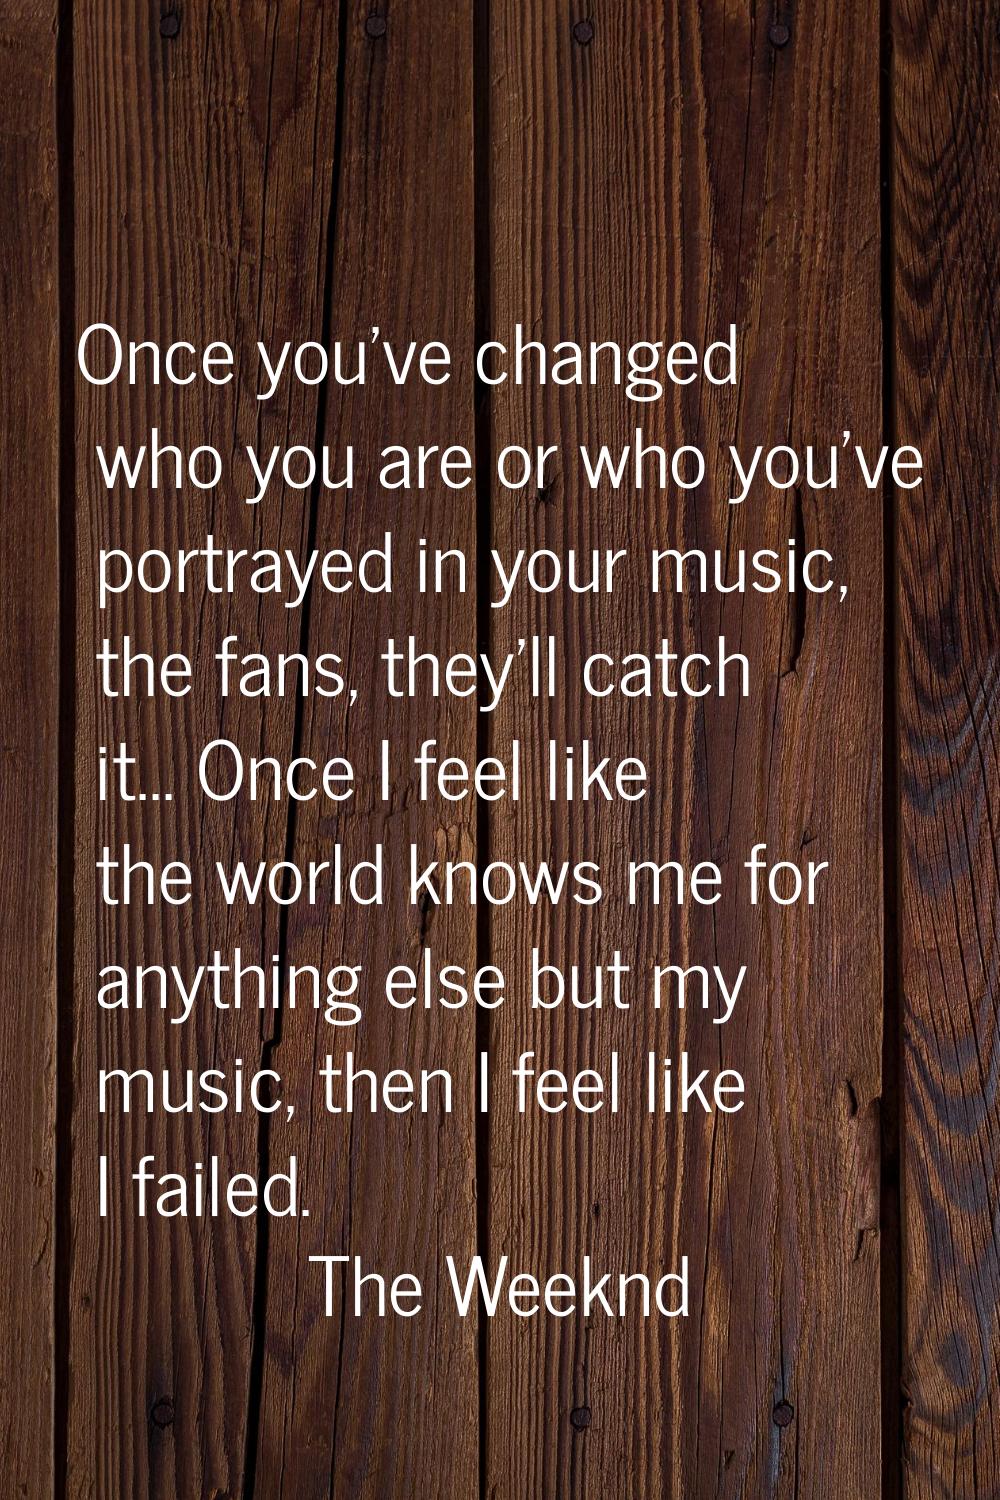 Once you've changed who you are or who you've portrayed in your music, the fans, they'll catch it..